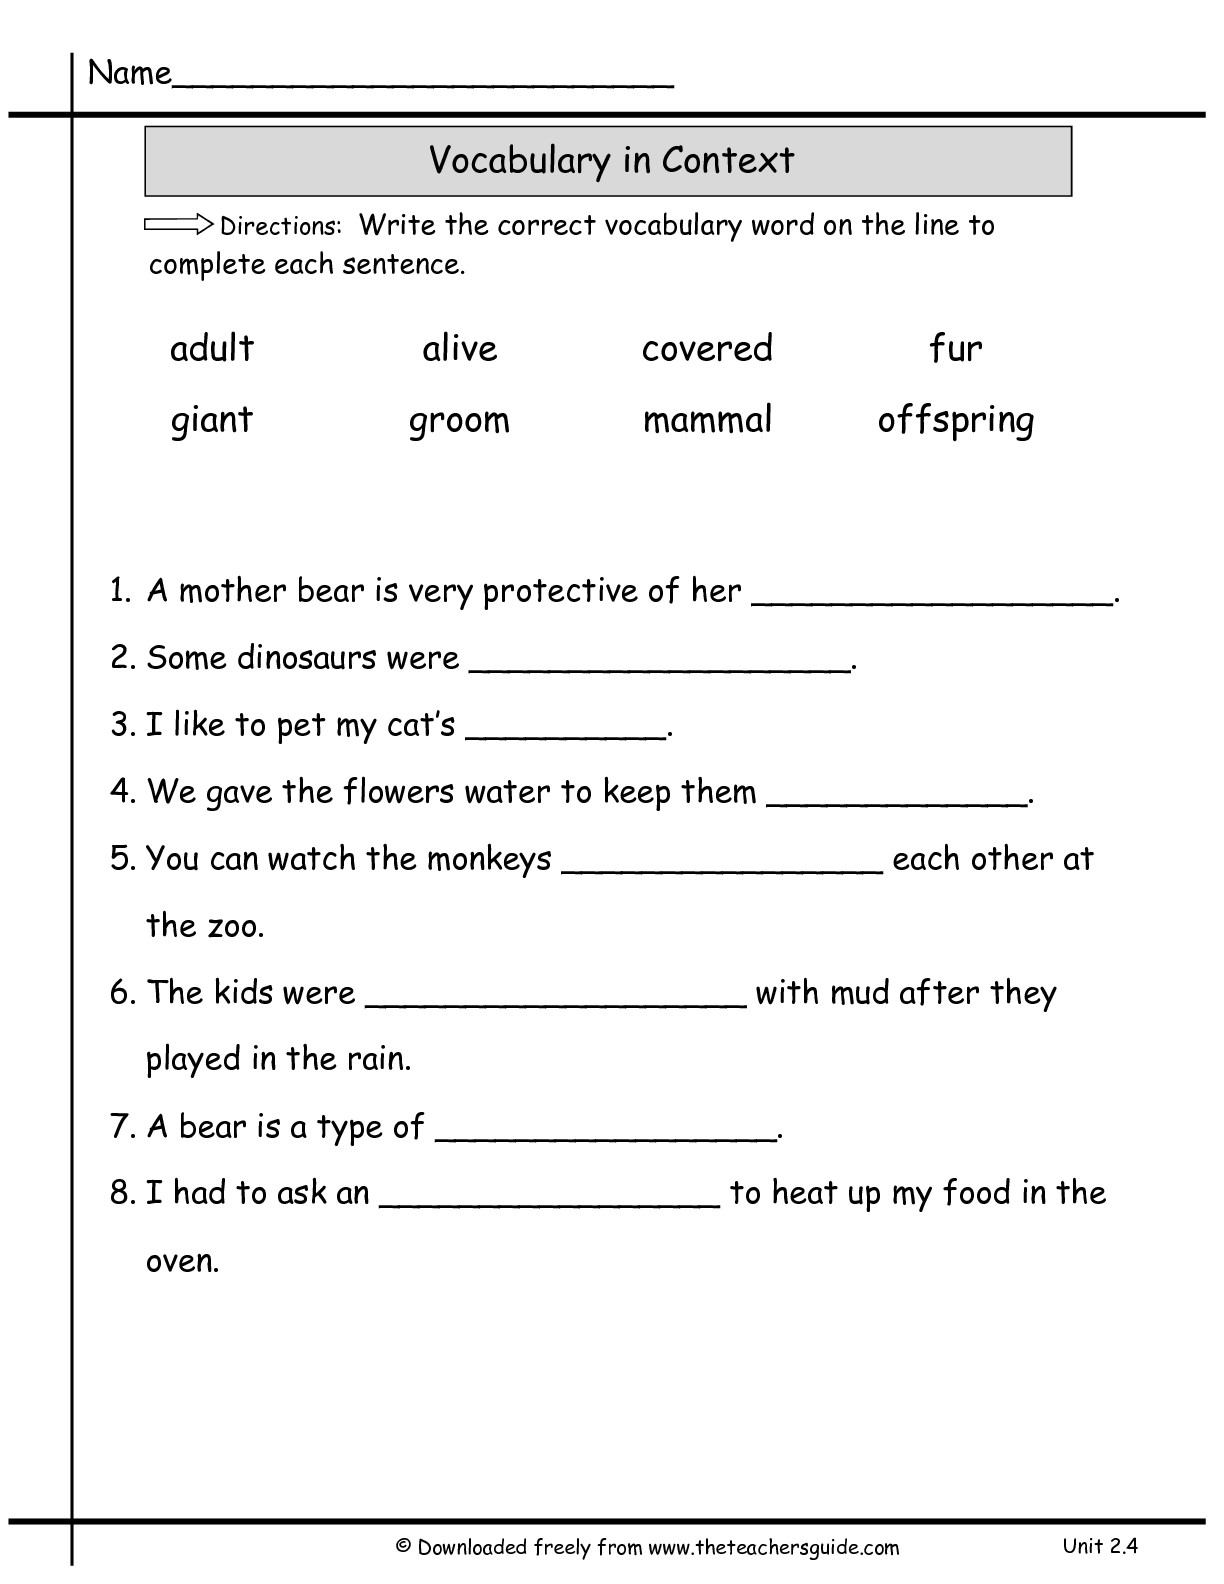 15 Best Images of Multiple Meaning Words Worksheet 2nd ...